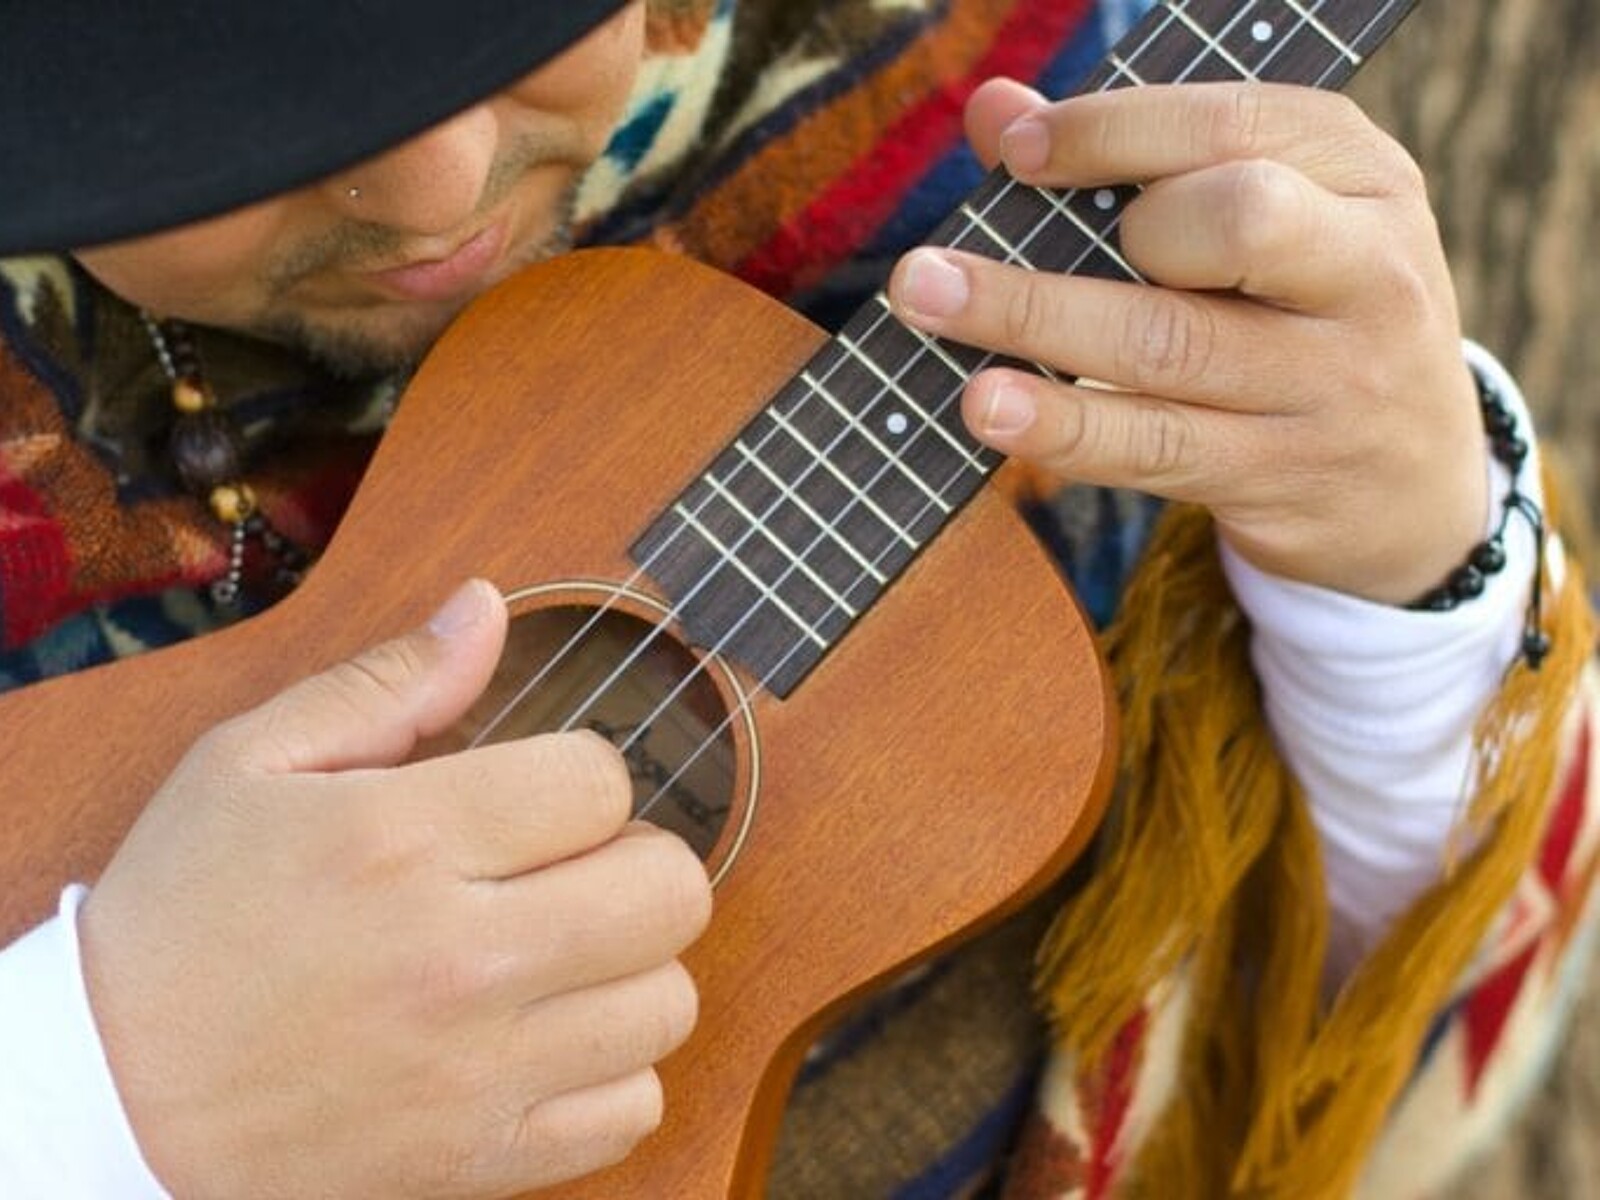 Got 15 minutes? You can learn to play the ukulele